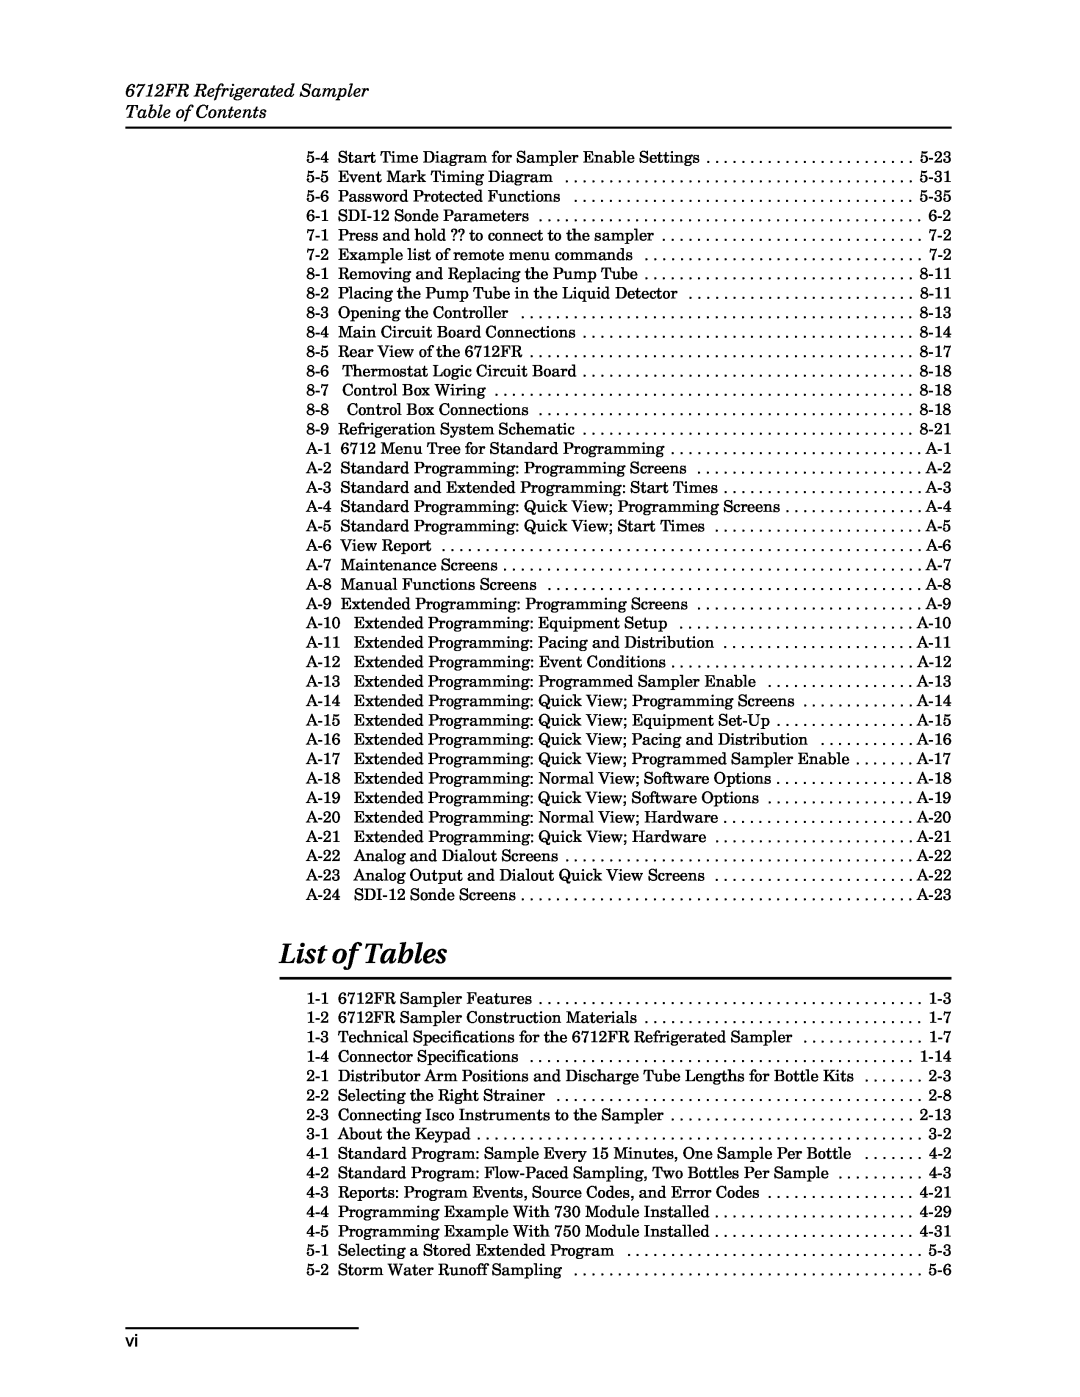 Teledyne manual List of Tables, 6712FR Refrigerated Sampler Table of Contents 